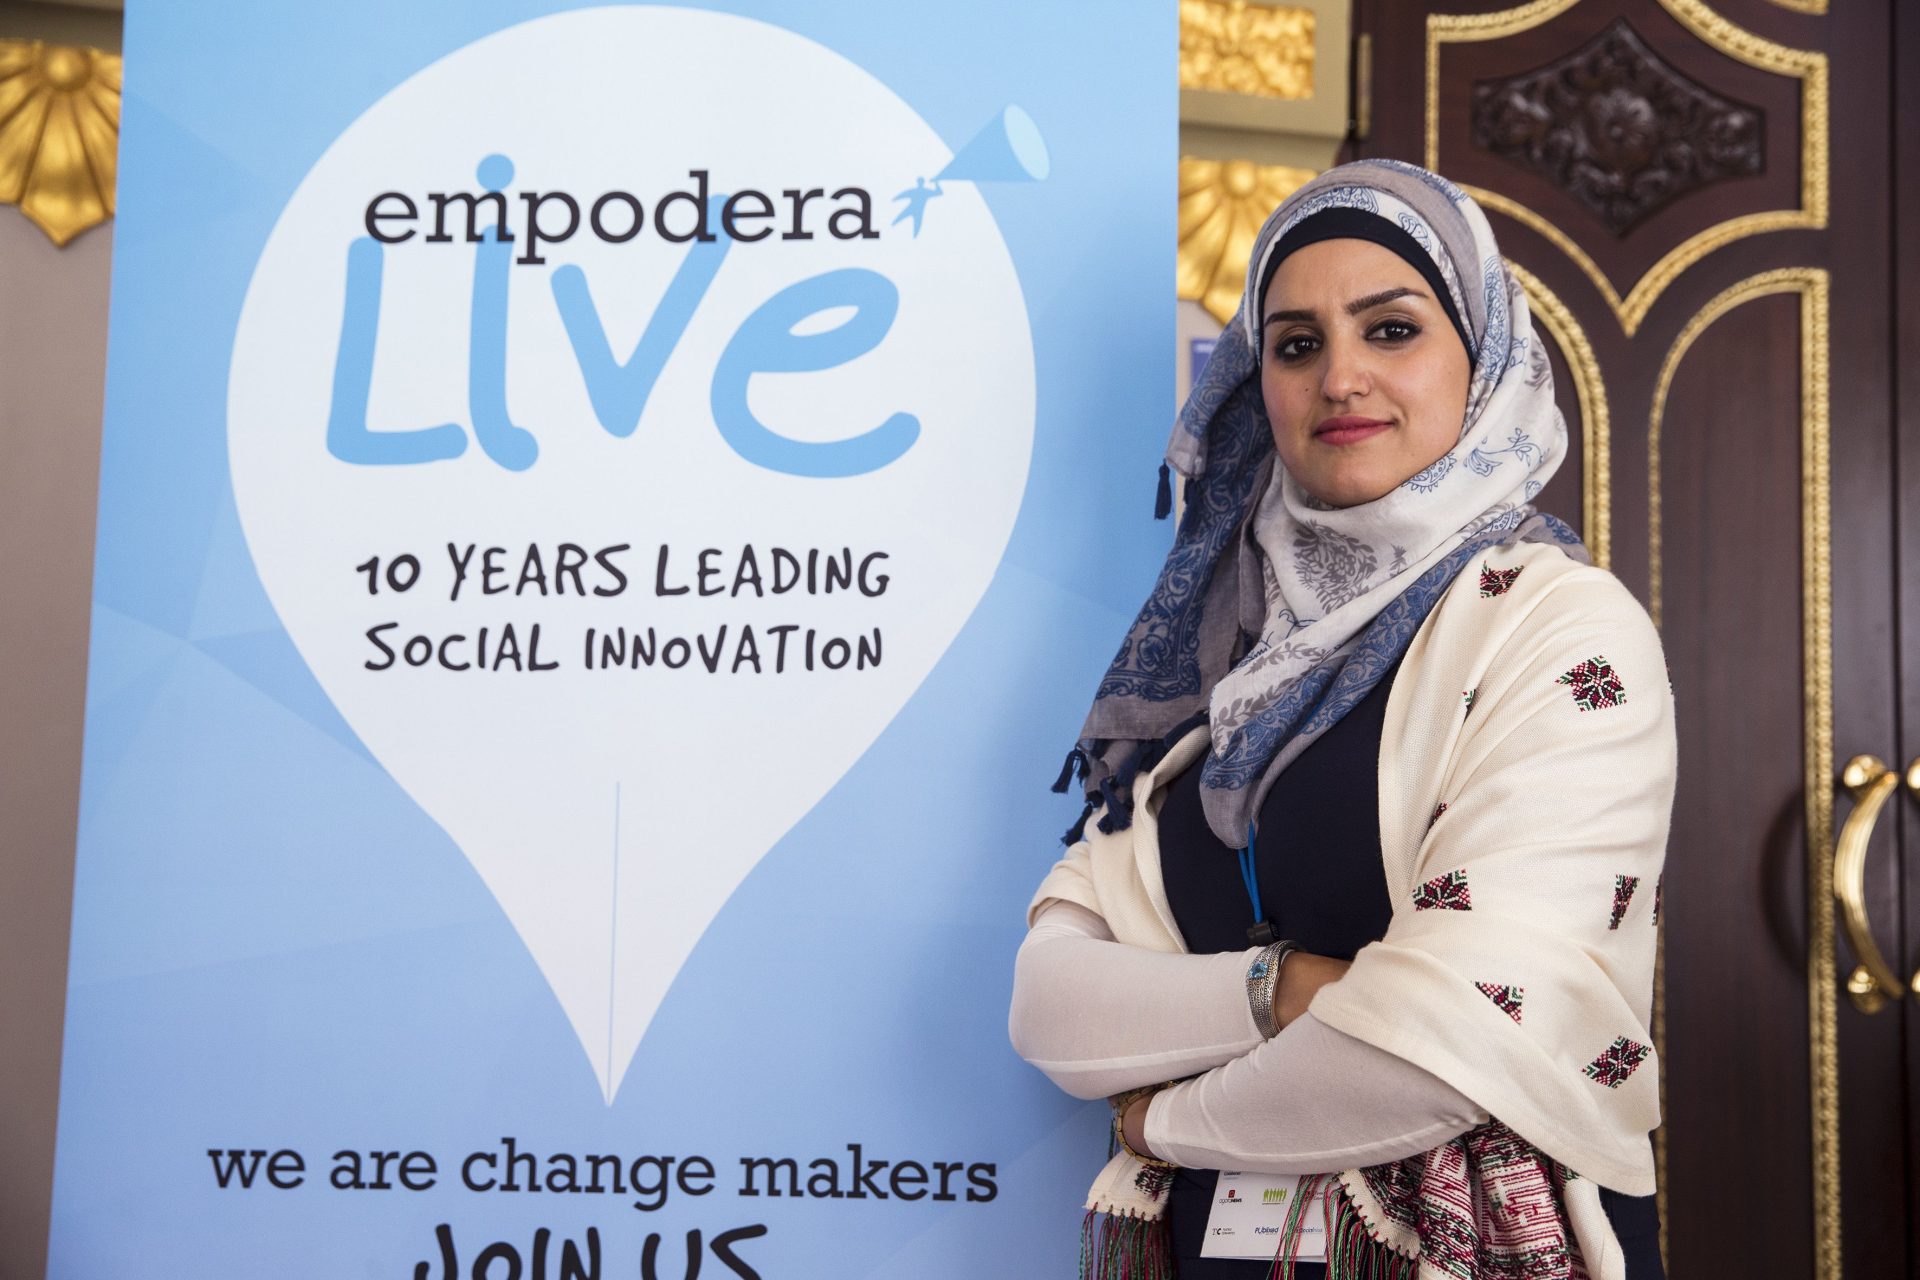 MENA Alliances Group founder Abeer Abu Ghaith, Palestine's first high-tech entrepreneur, next to the symposium poster ""Empower Live""    held in Malaga, 2016. Businesswomen in the Middle East are stuck between glass walls and ceilings.